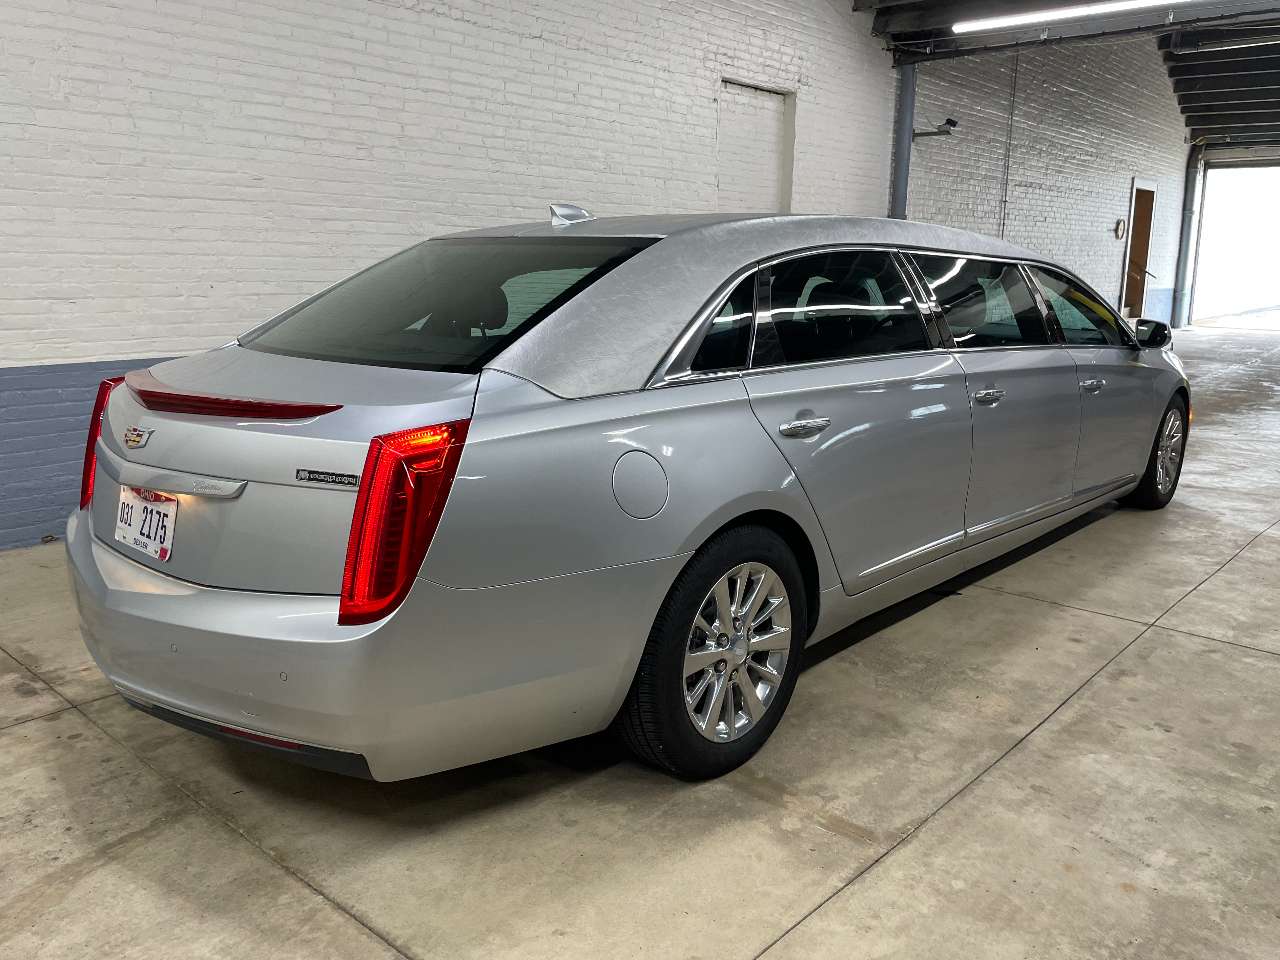 2017 Cadillac Armbruster Stageway XTS L6 Limousine 1659102139893